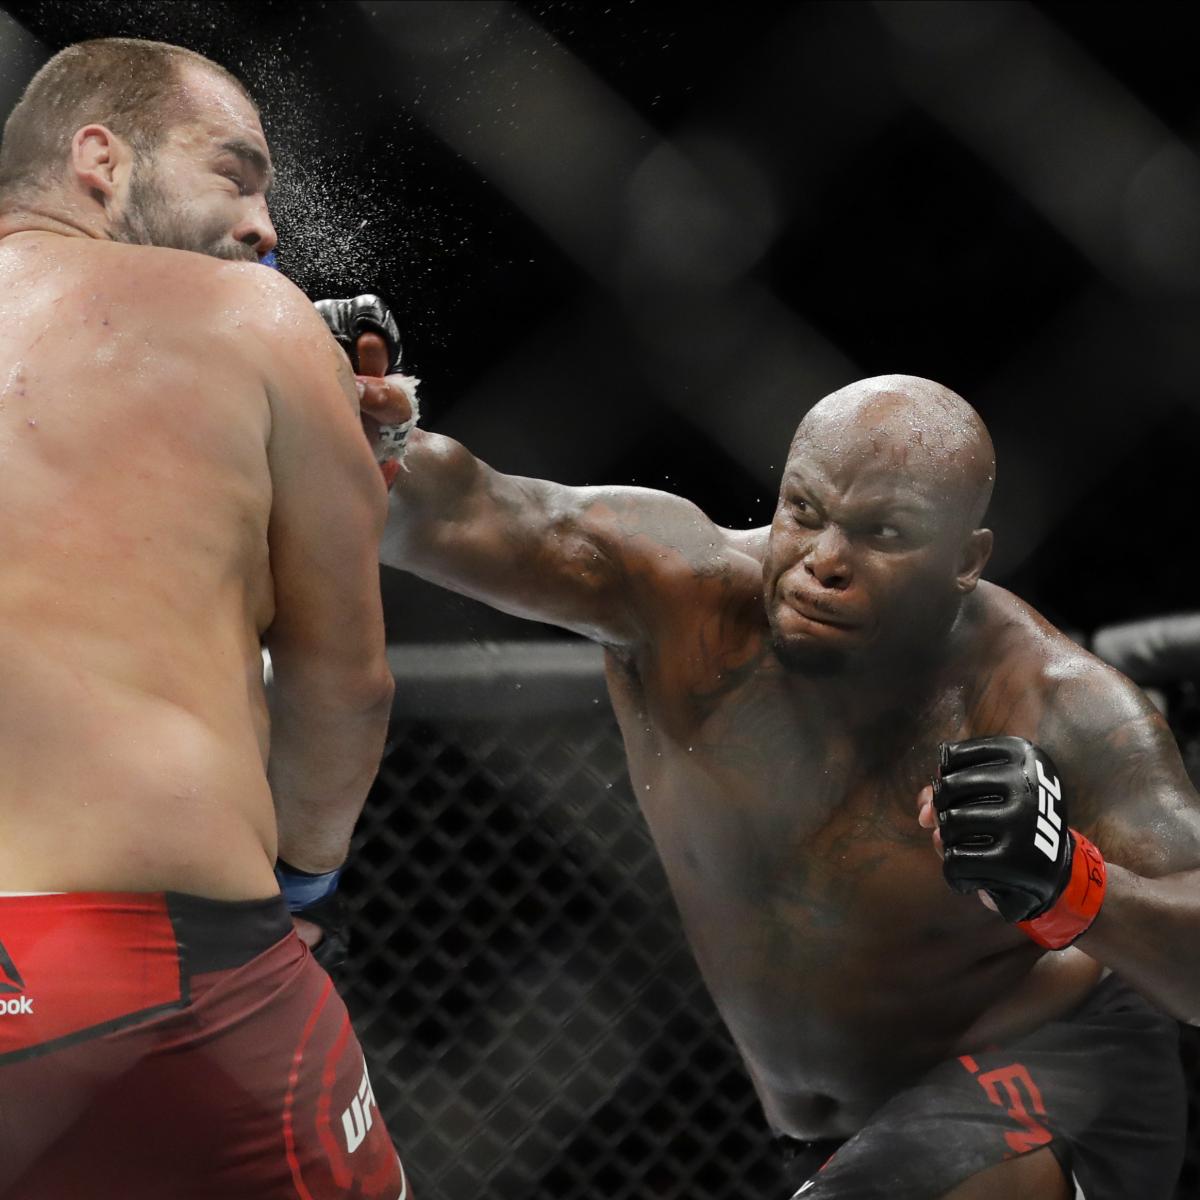 UFC’s Derrick Lewis, Son ‘OK’ After ATV Smash at Home Caught on Video